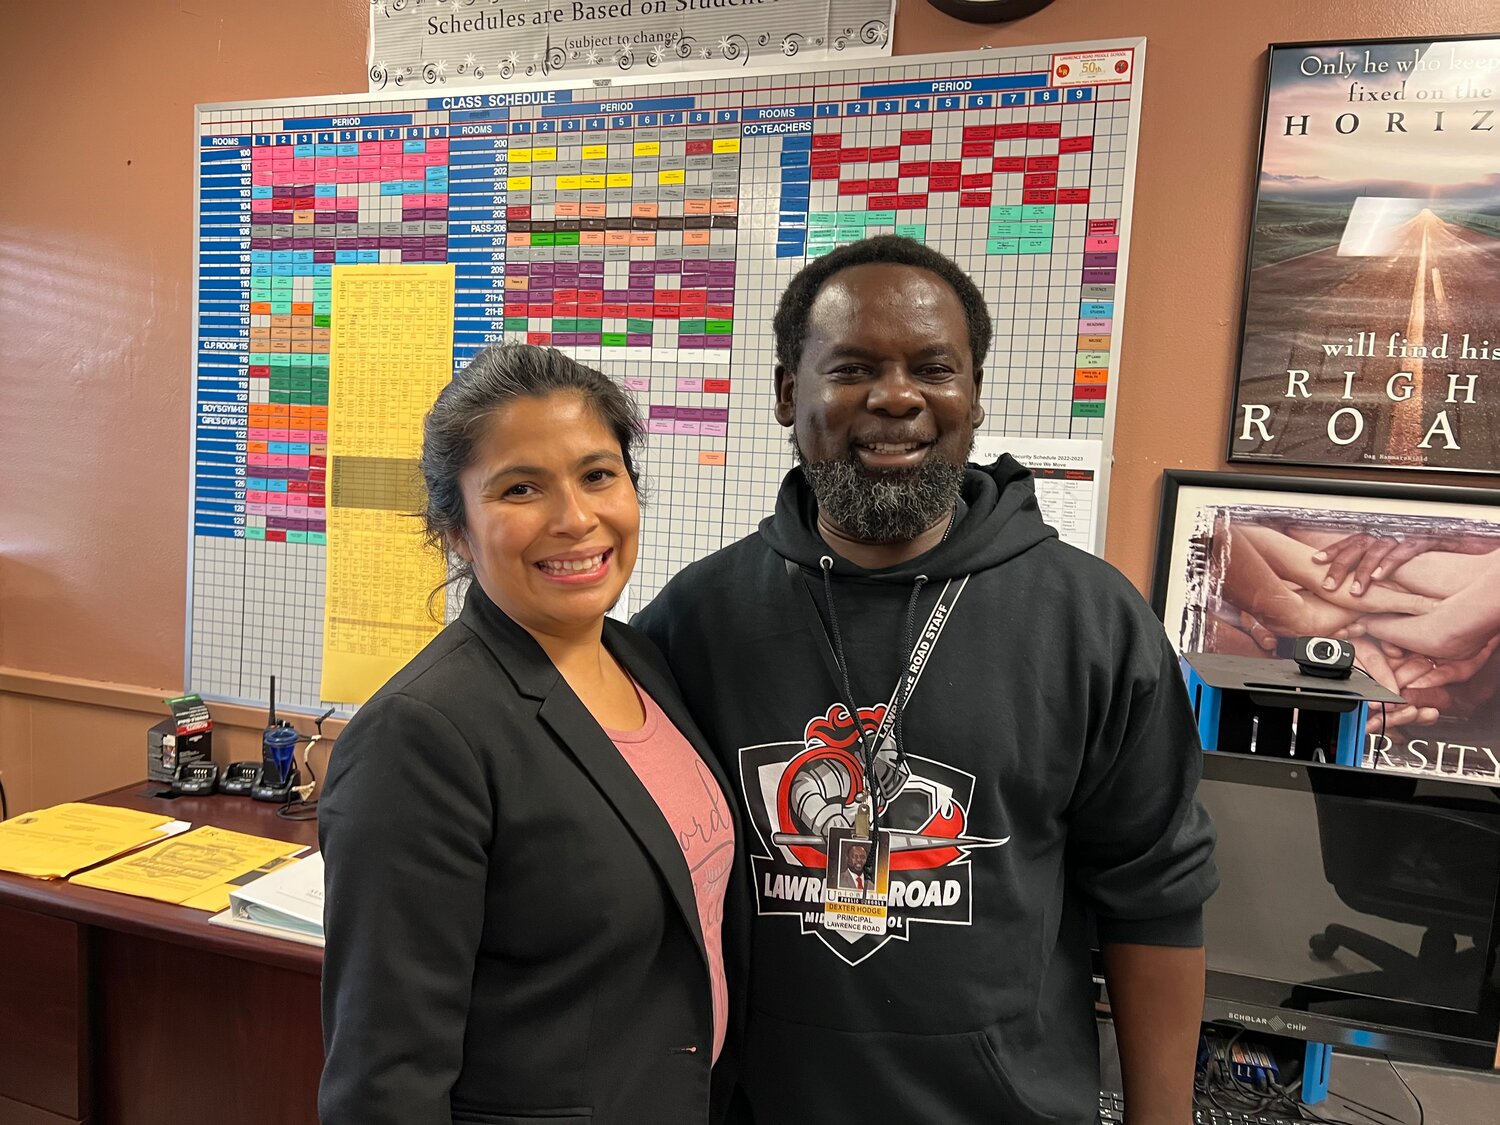 Lawrence Road Middle School teacher Veronica Argueta, a member of the school’s Equity Team, and Principal Dexter Hodge worked with the Lawrence Road and Uniondale district staff to revise the complicated scheduling board, seen on the wall behind them.